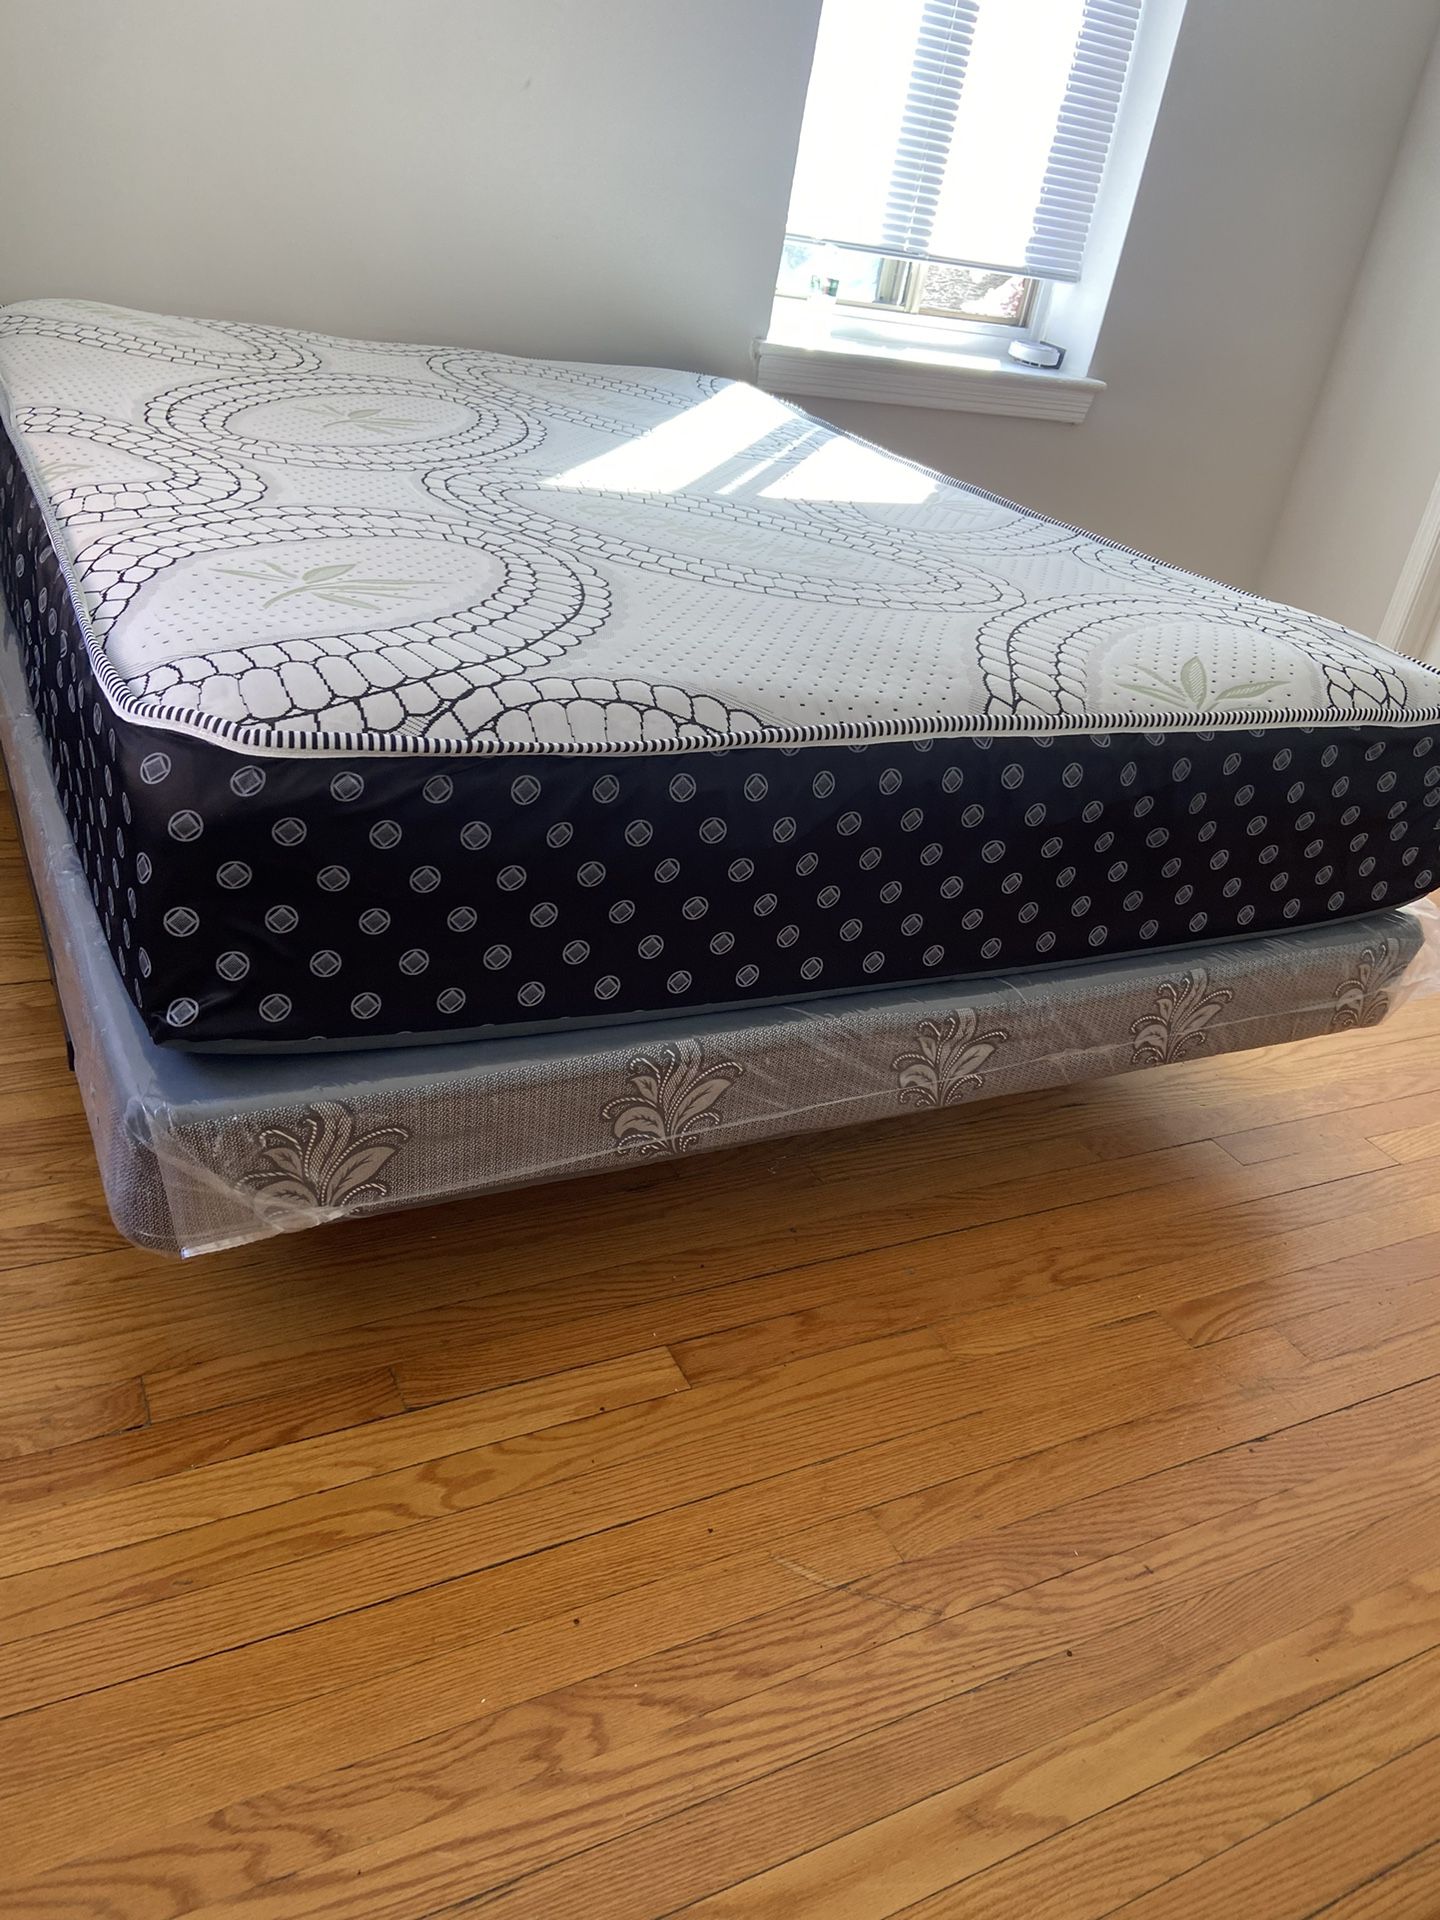 Queen Mattress Come With Rails Frame ( Metal) Come With Free Box Spring - Same Day Delivery 